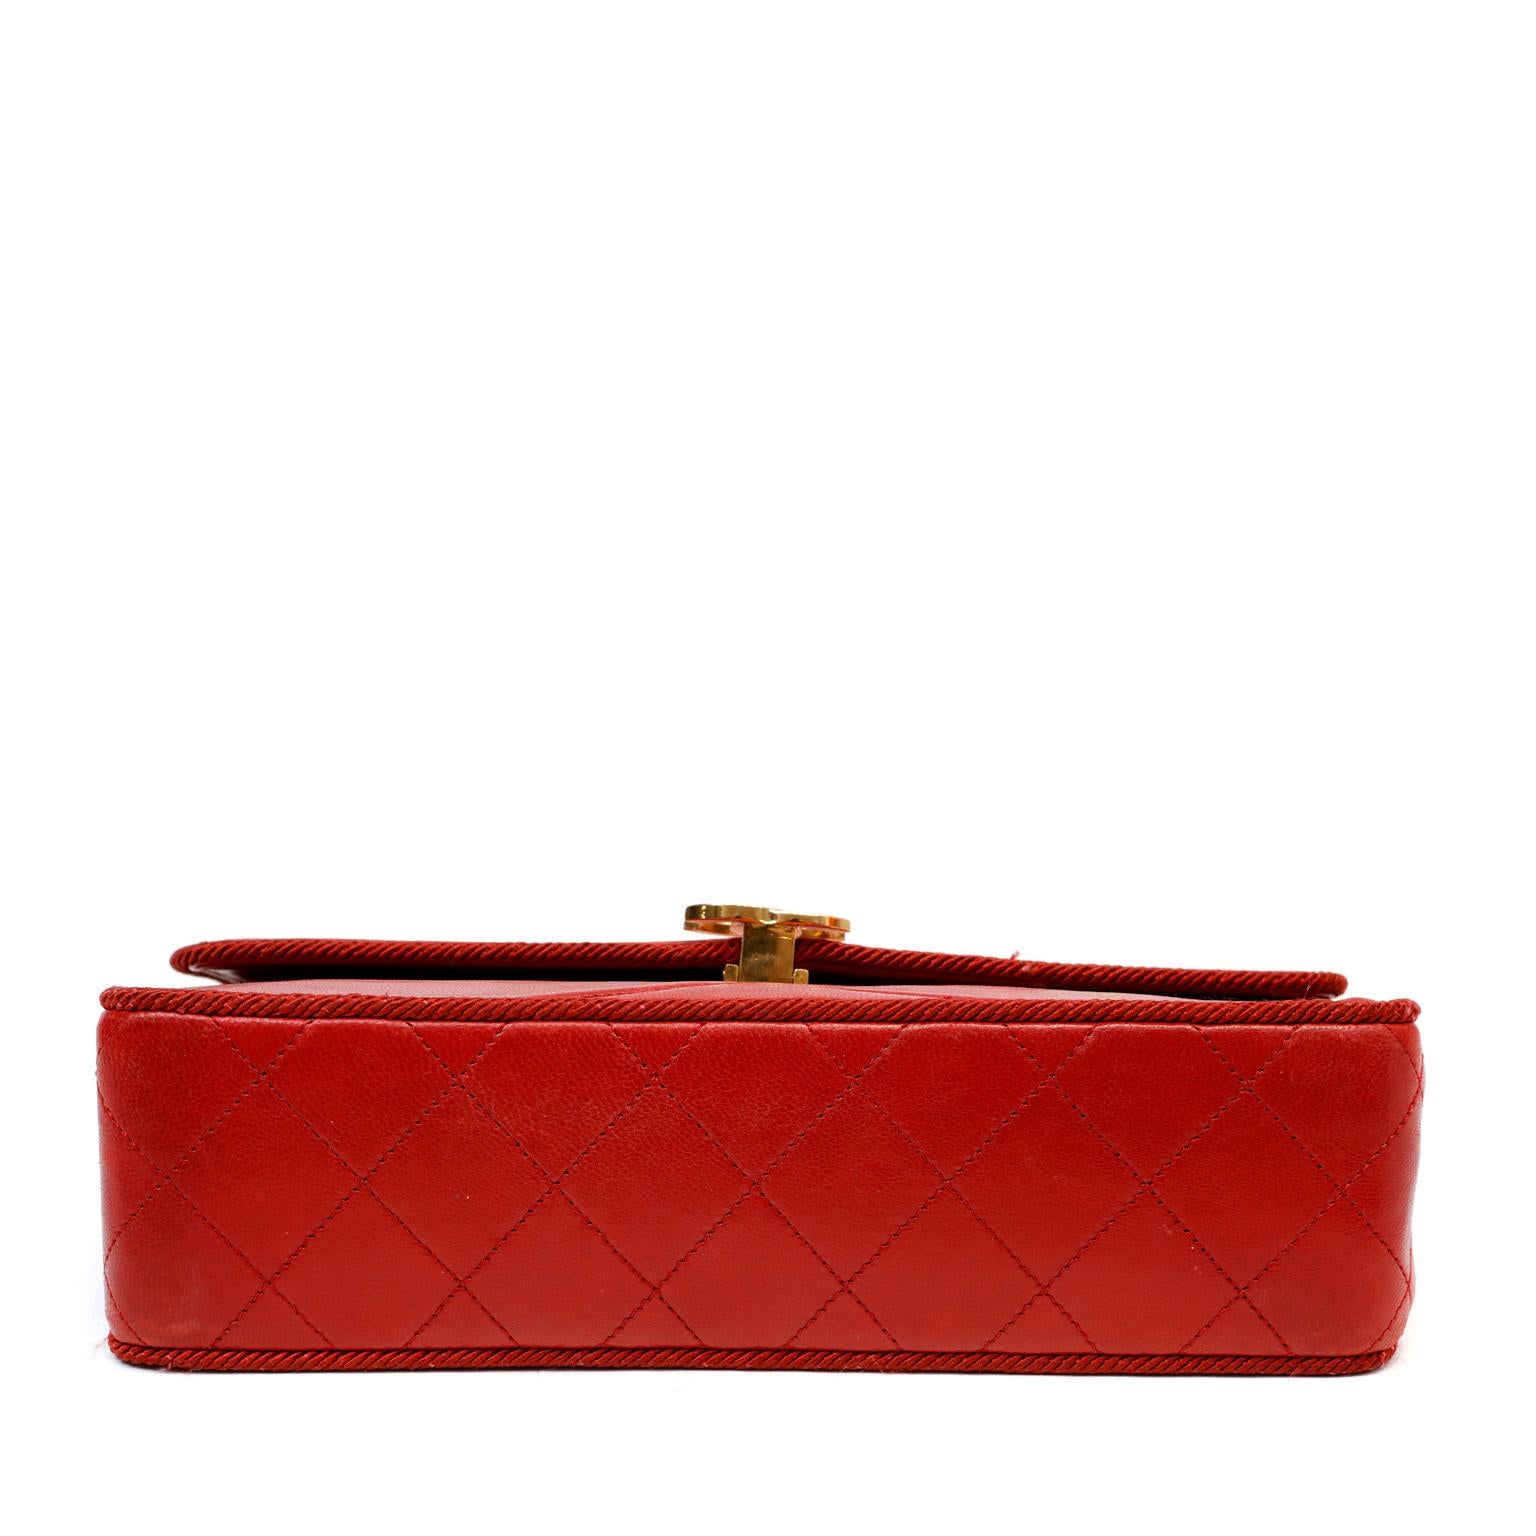 Women's Chanel Vintage Red Leather Scallop Quilted Flap Bag  For Sale